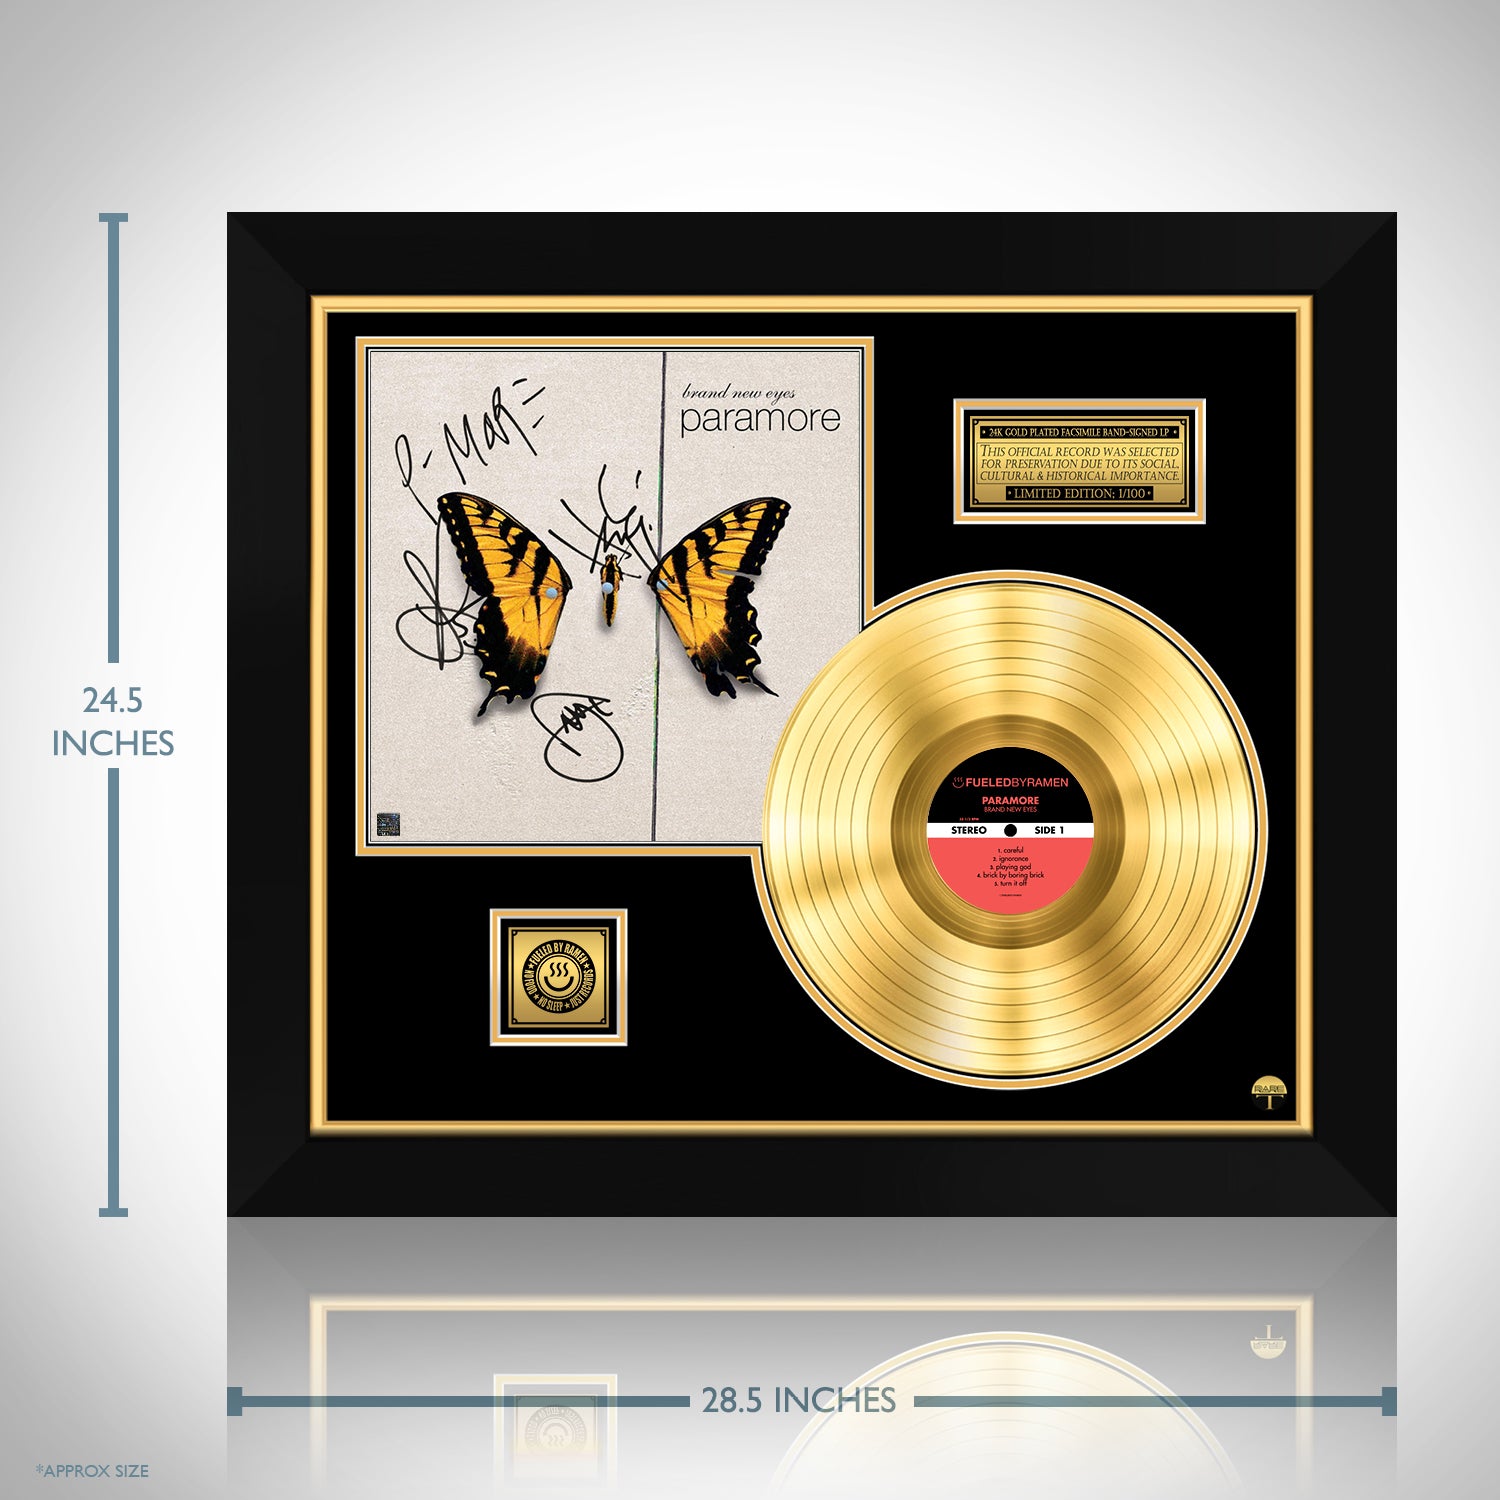 Paramore Brand New Eyes Gold LP Limited Signature Edition Custom